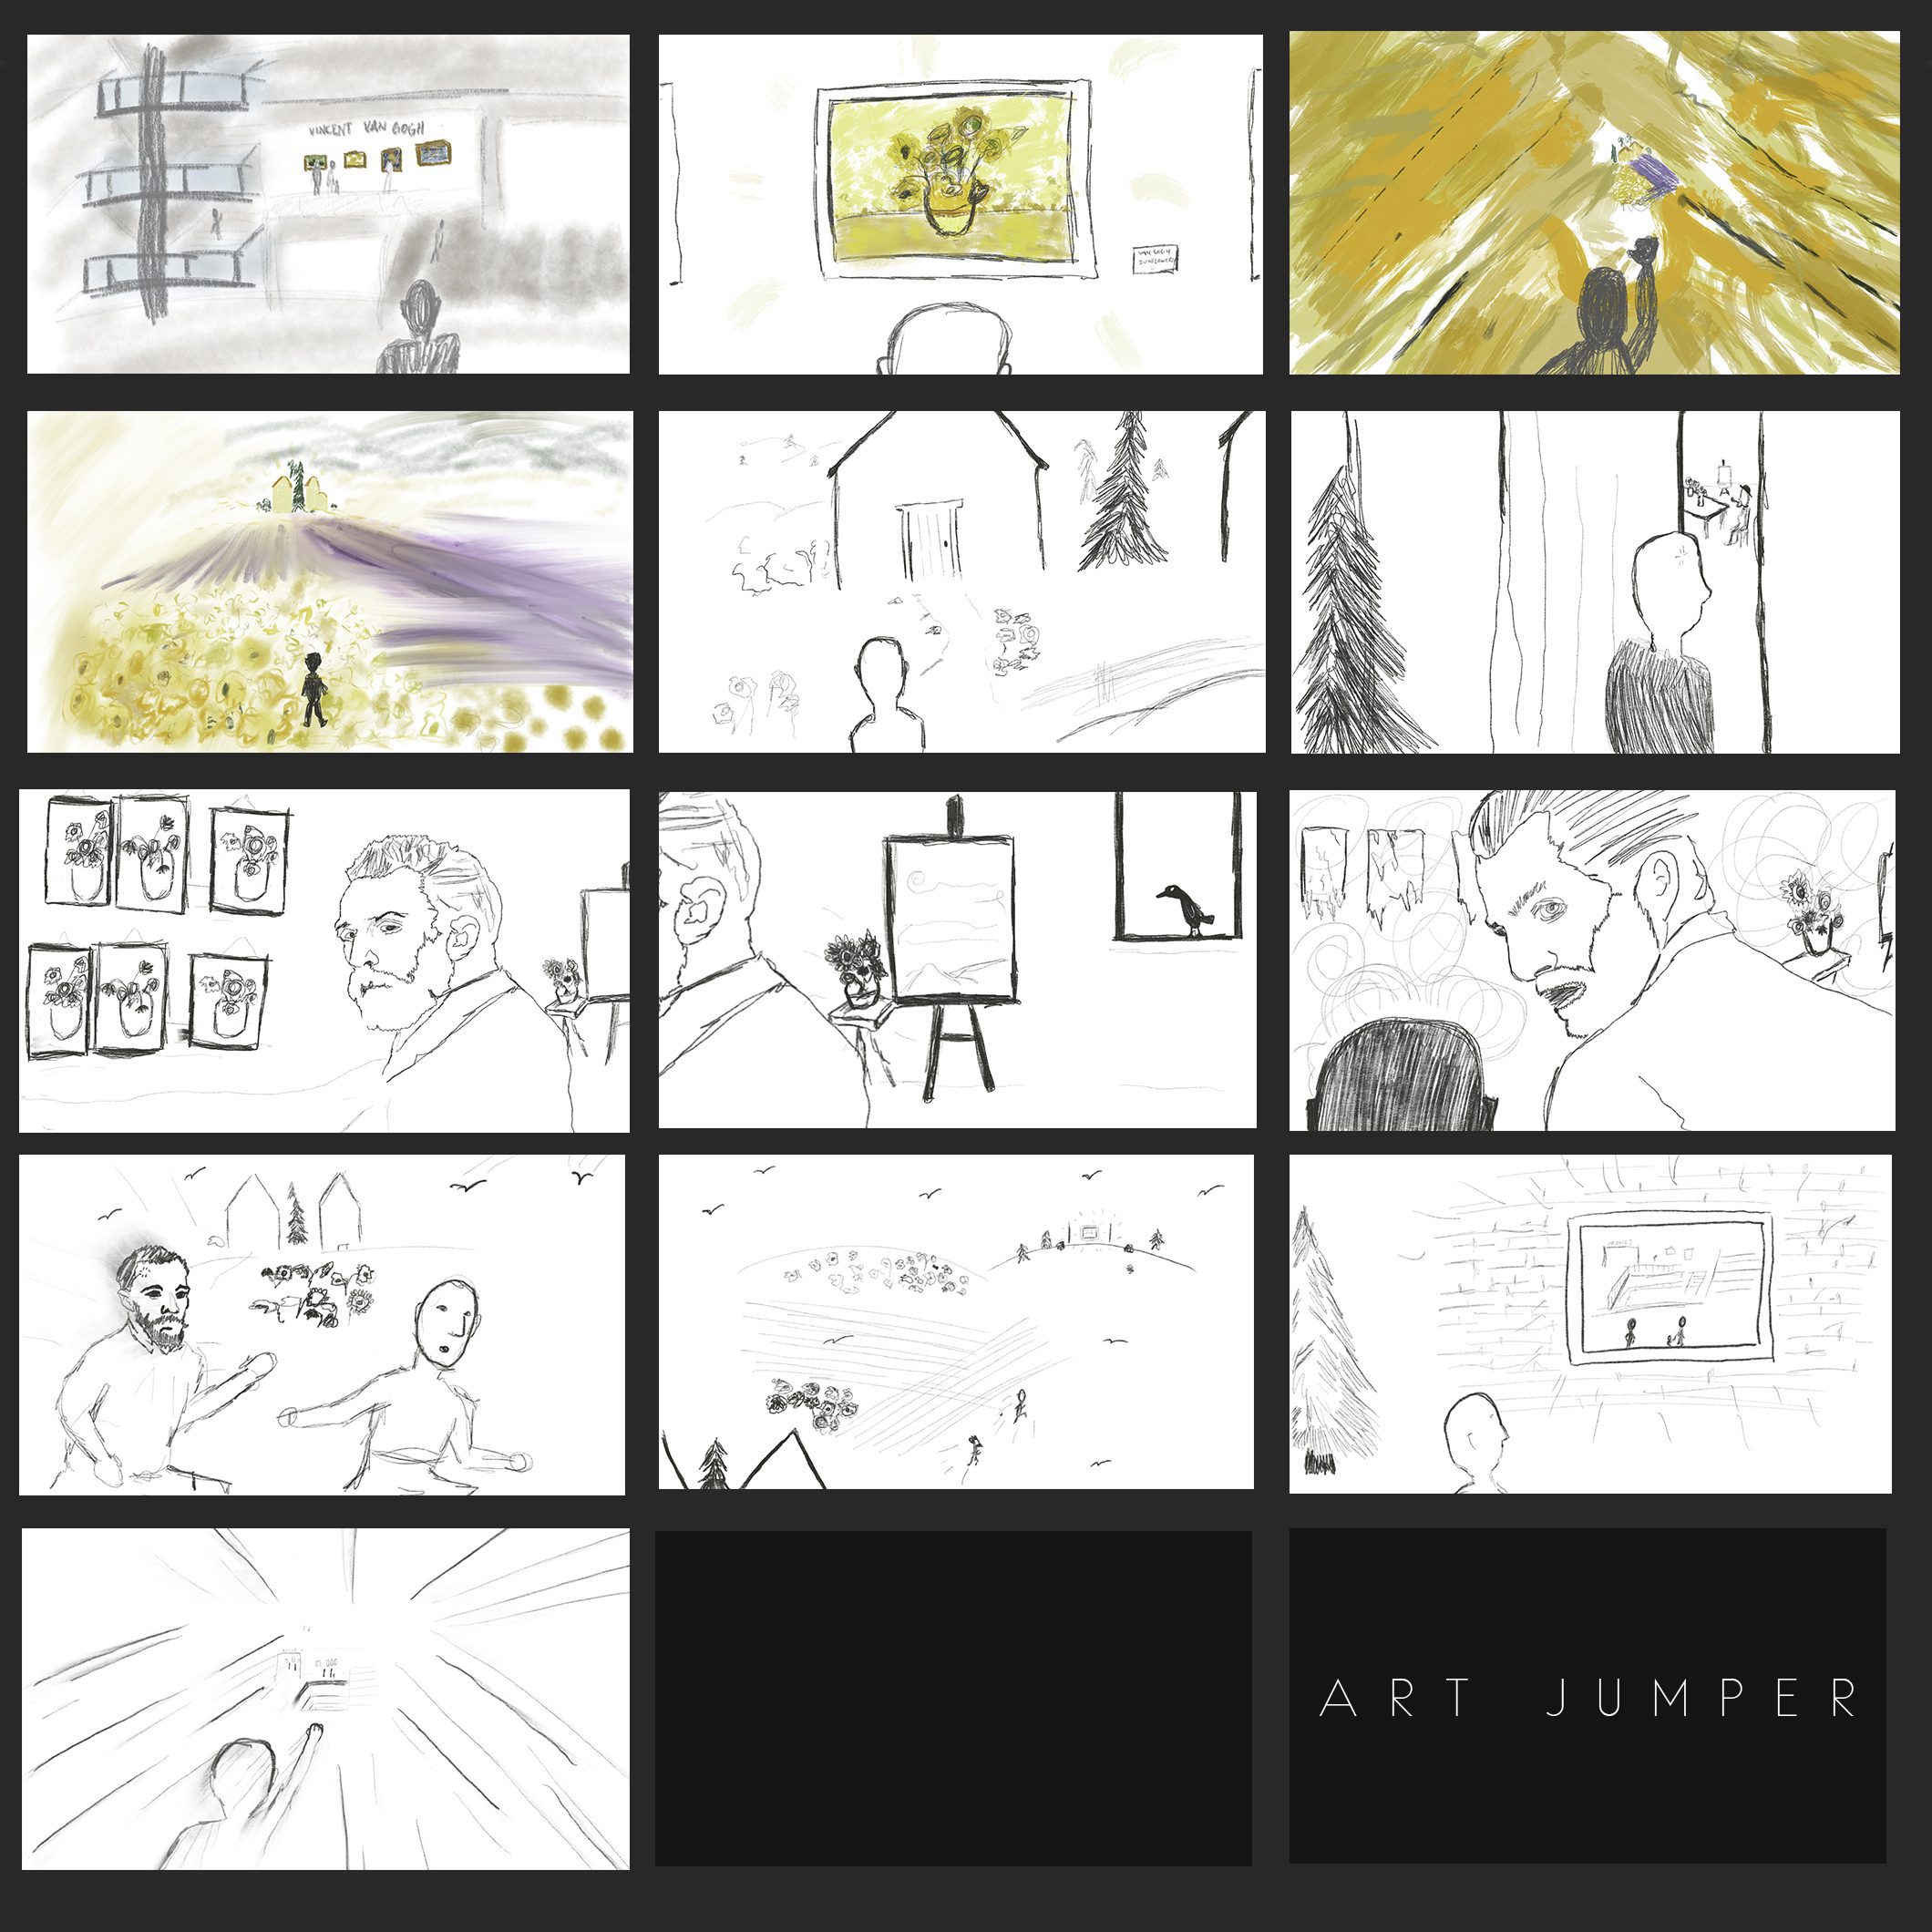 IU Art Jumper Van Gogh Storyboard with black and white and color drawings